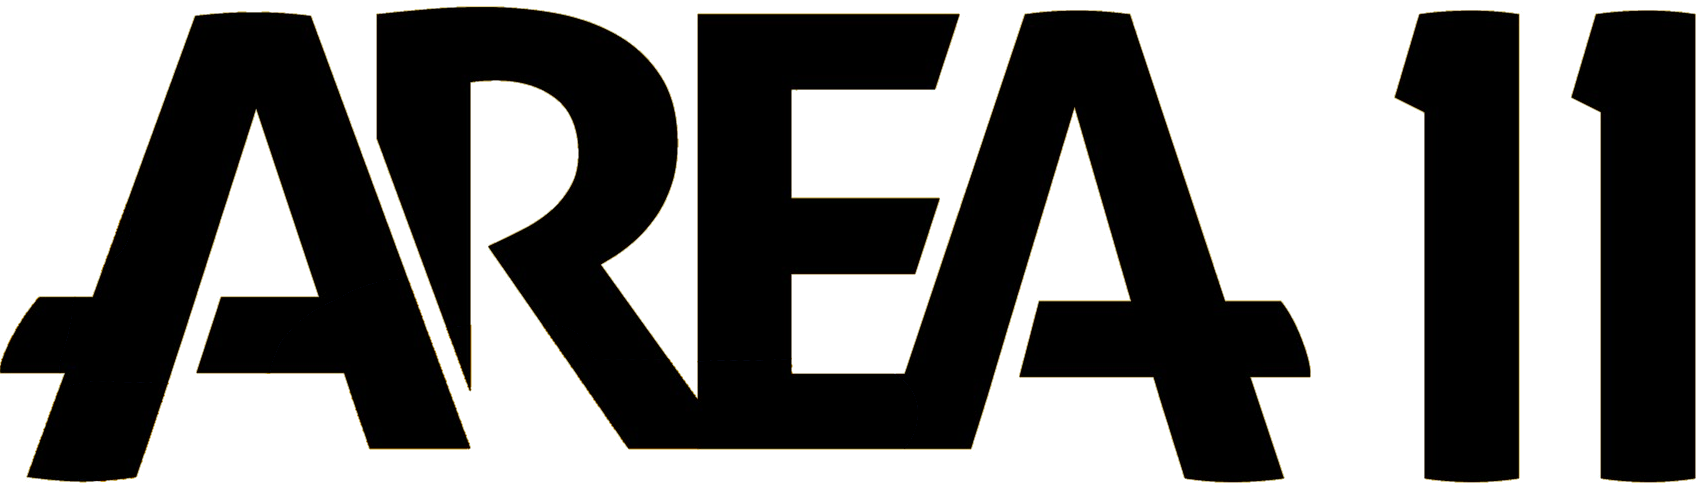 Area Logo - File:Area 11 Typeface Logo, Used from 2012-Presnt.png